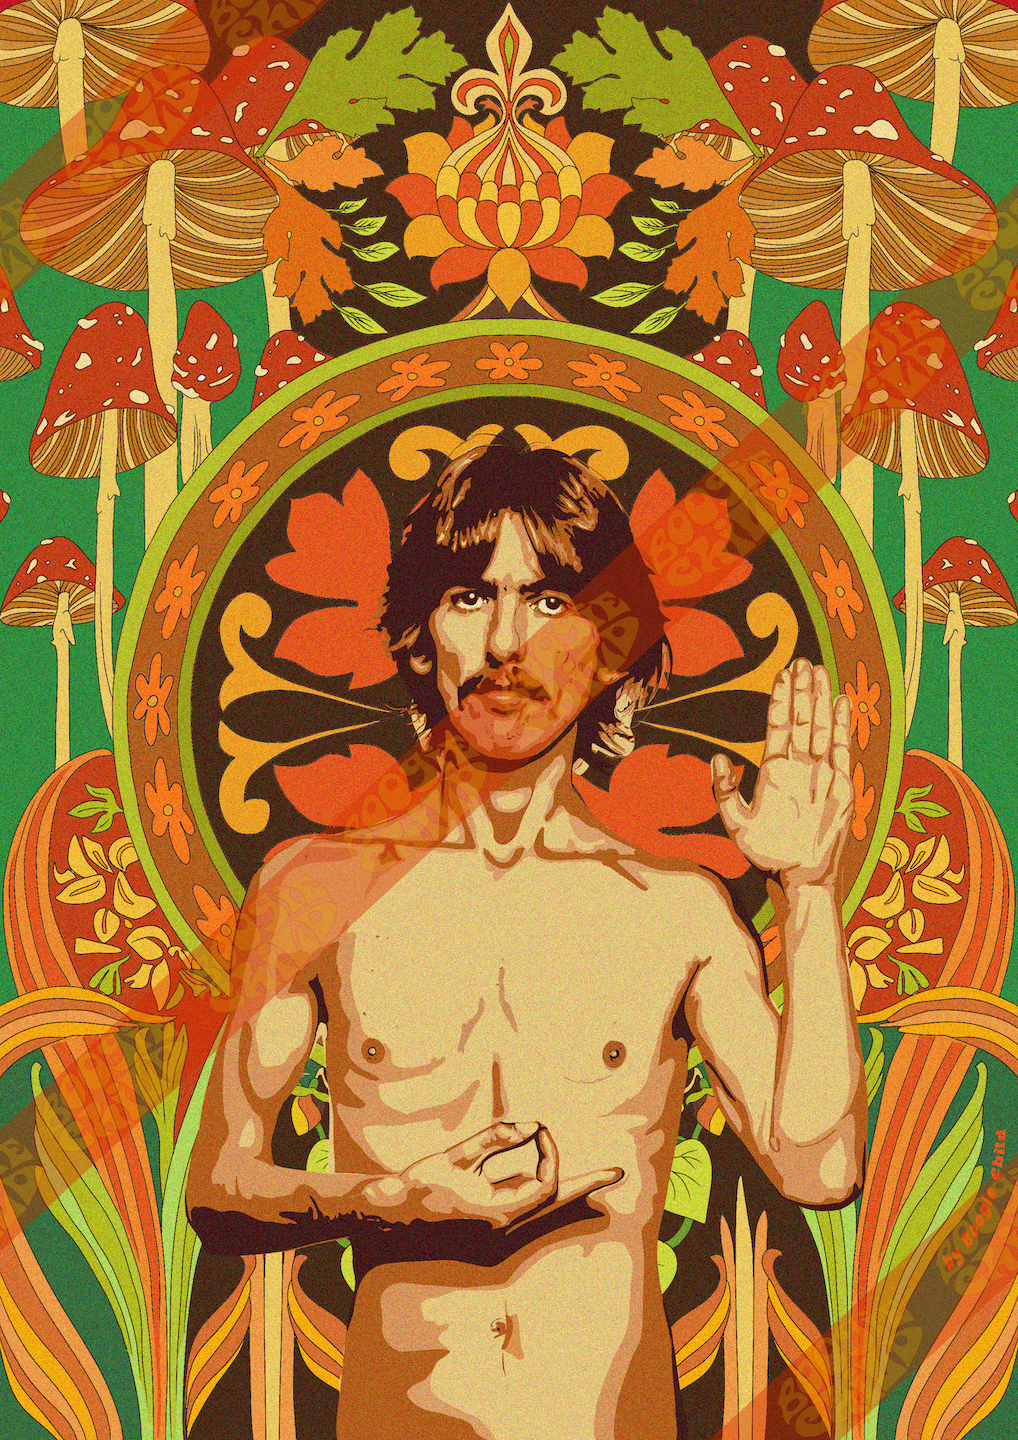 The George Harrison Print - Size A3 / 11.7" × 16.5"